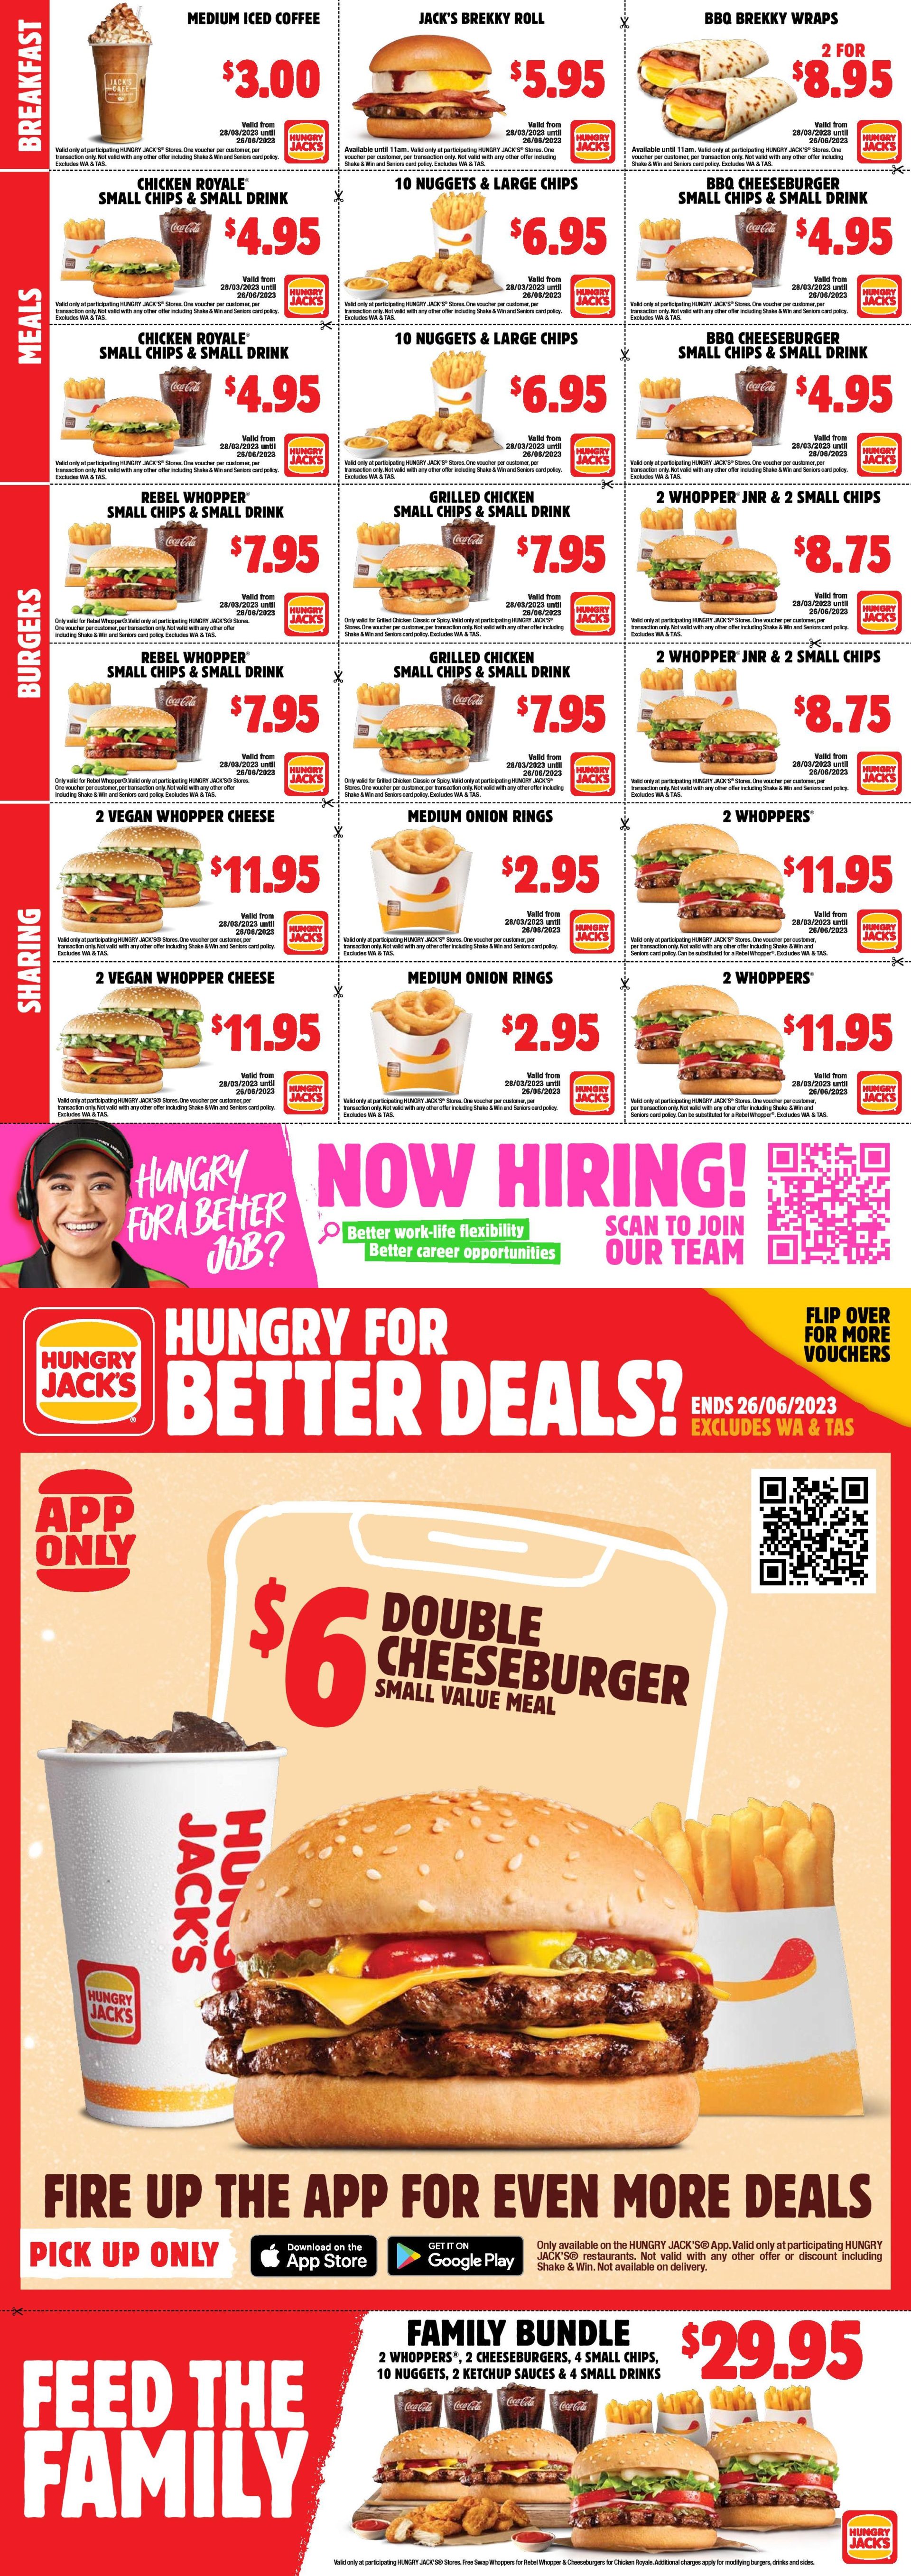 Hungry Jack's Voucher (Valid until 26th June 2023) (Excludes WA) (Page